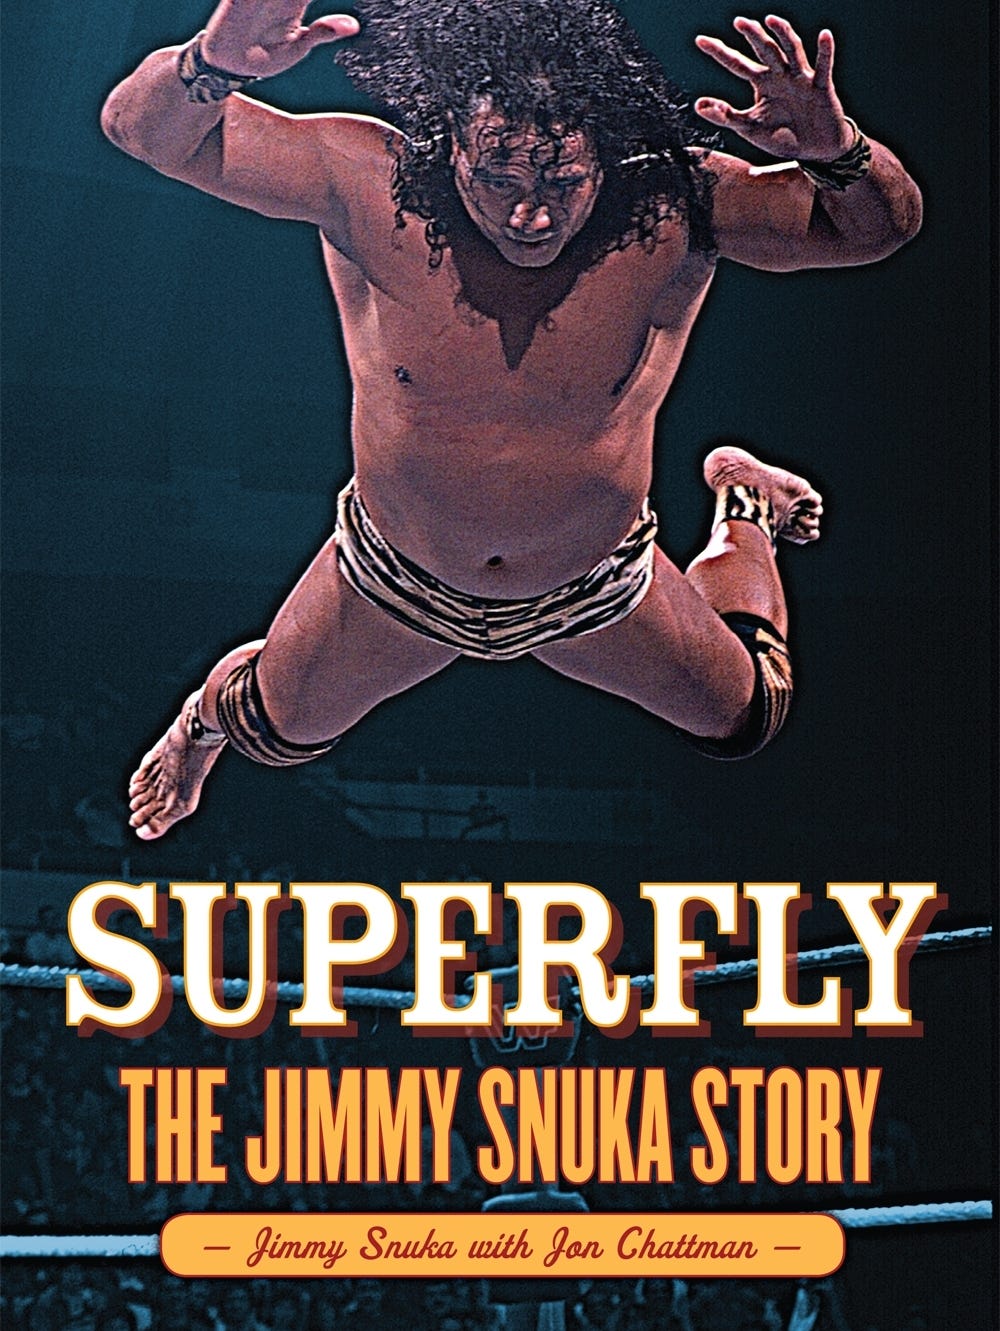 Exclusive Preface Of Superfly The Jimmy Snuka Story